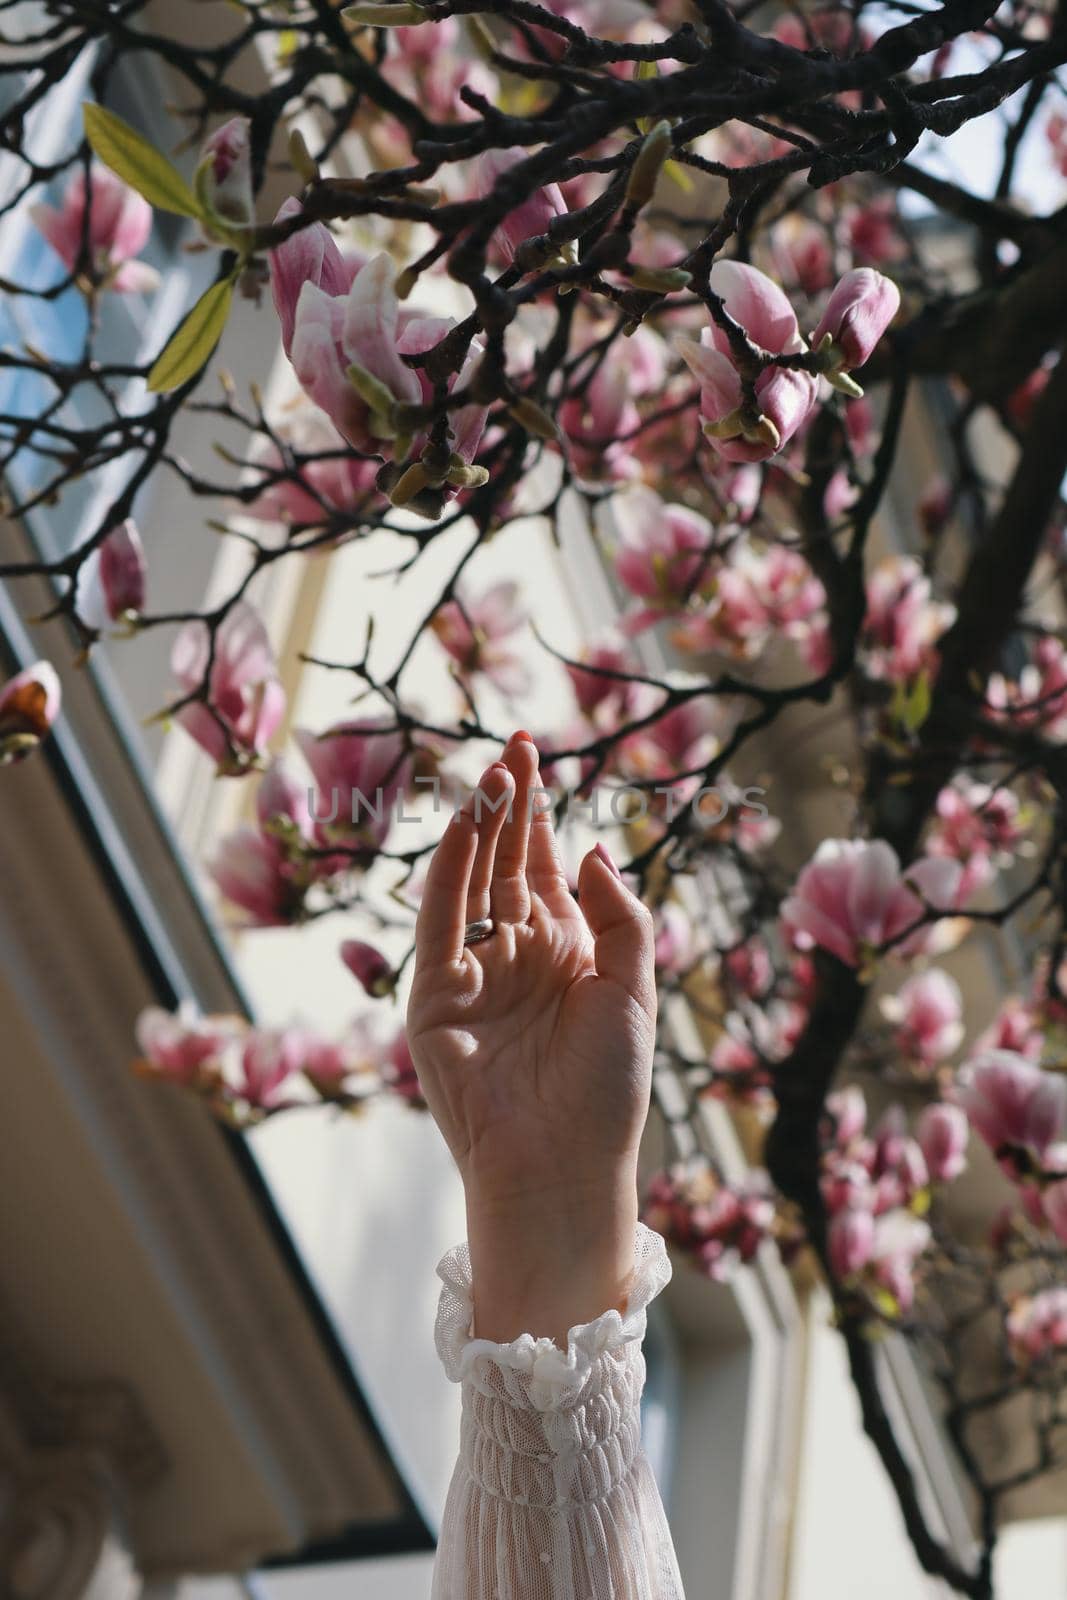 Blossoming magnolia flower in a girl s hand. Spring background